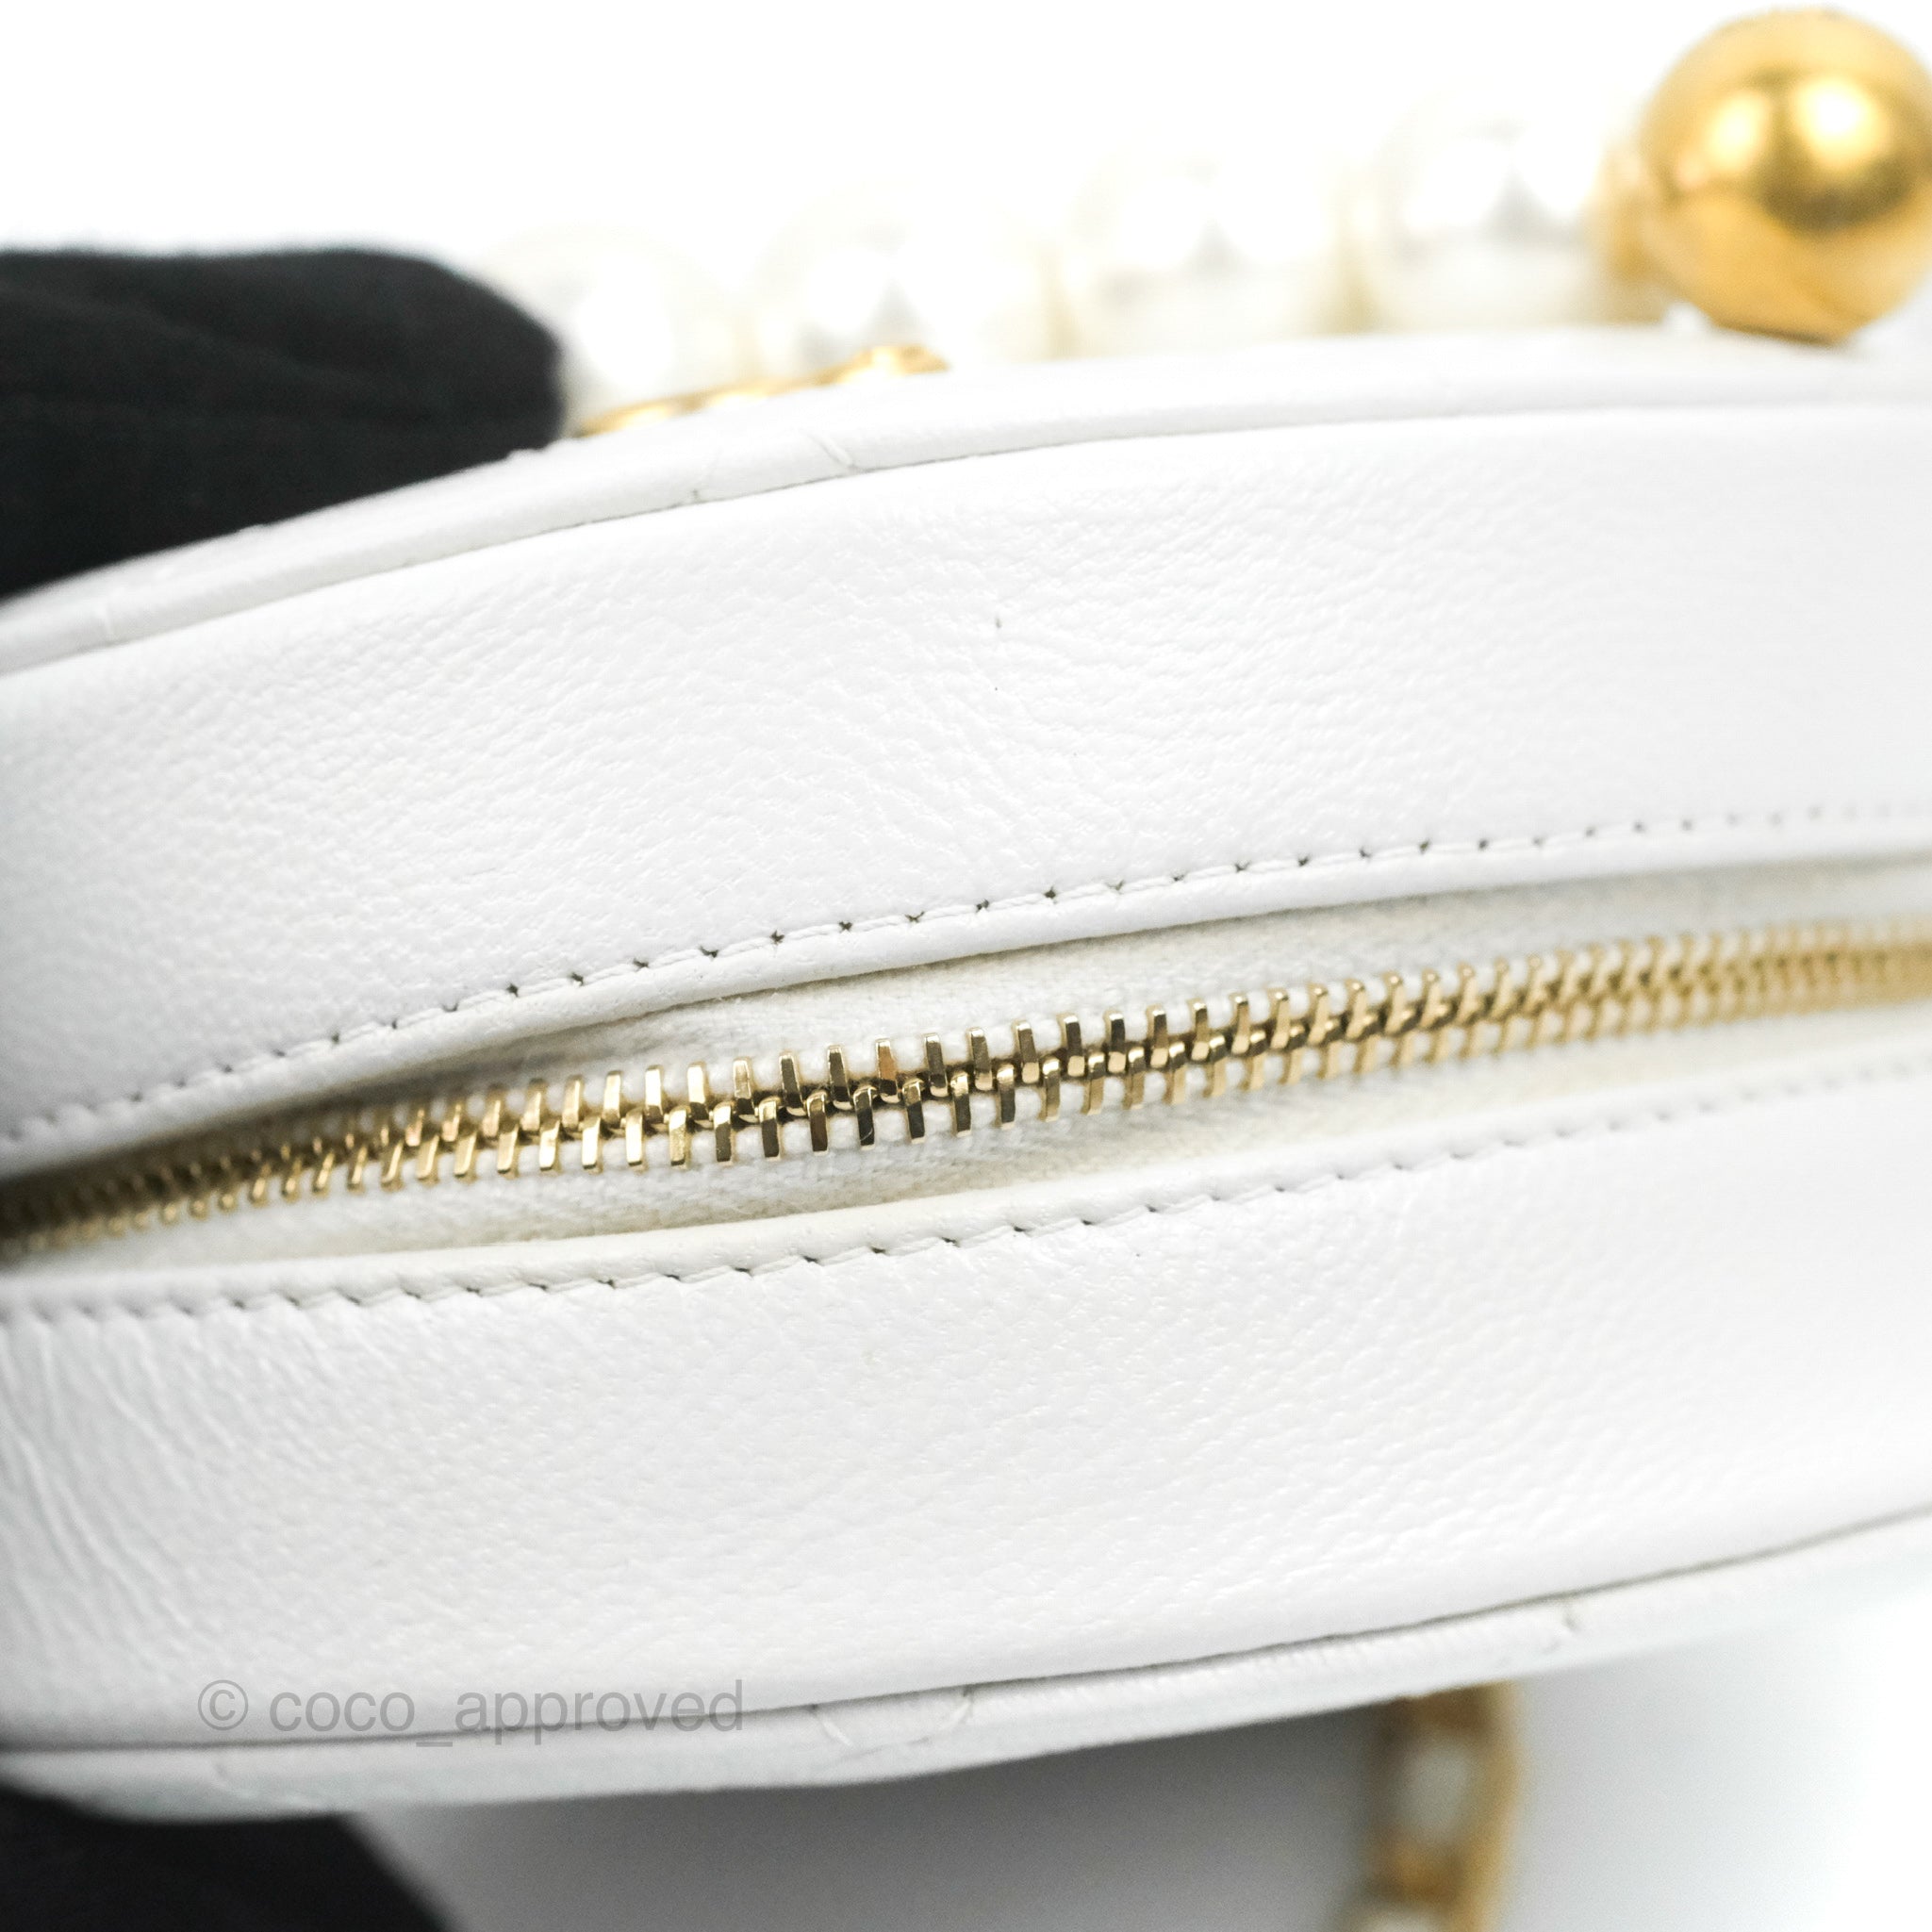 Chanel White Quilted Lambskin Mini Flap Bag Gold And Imitation